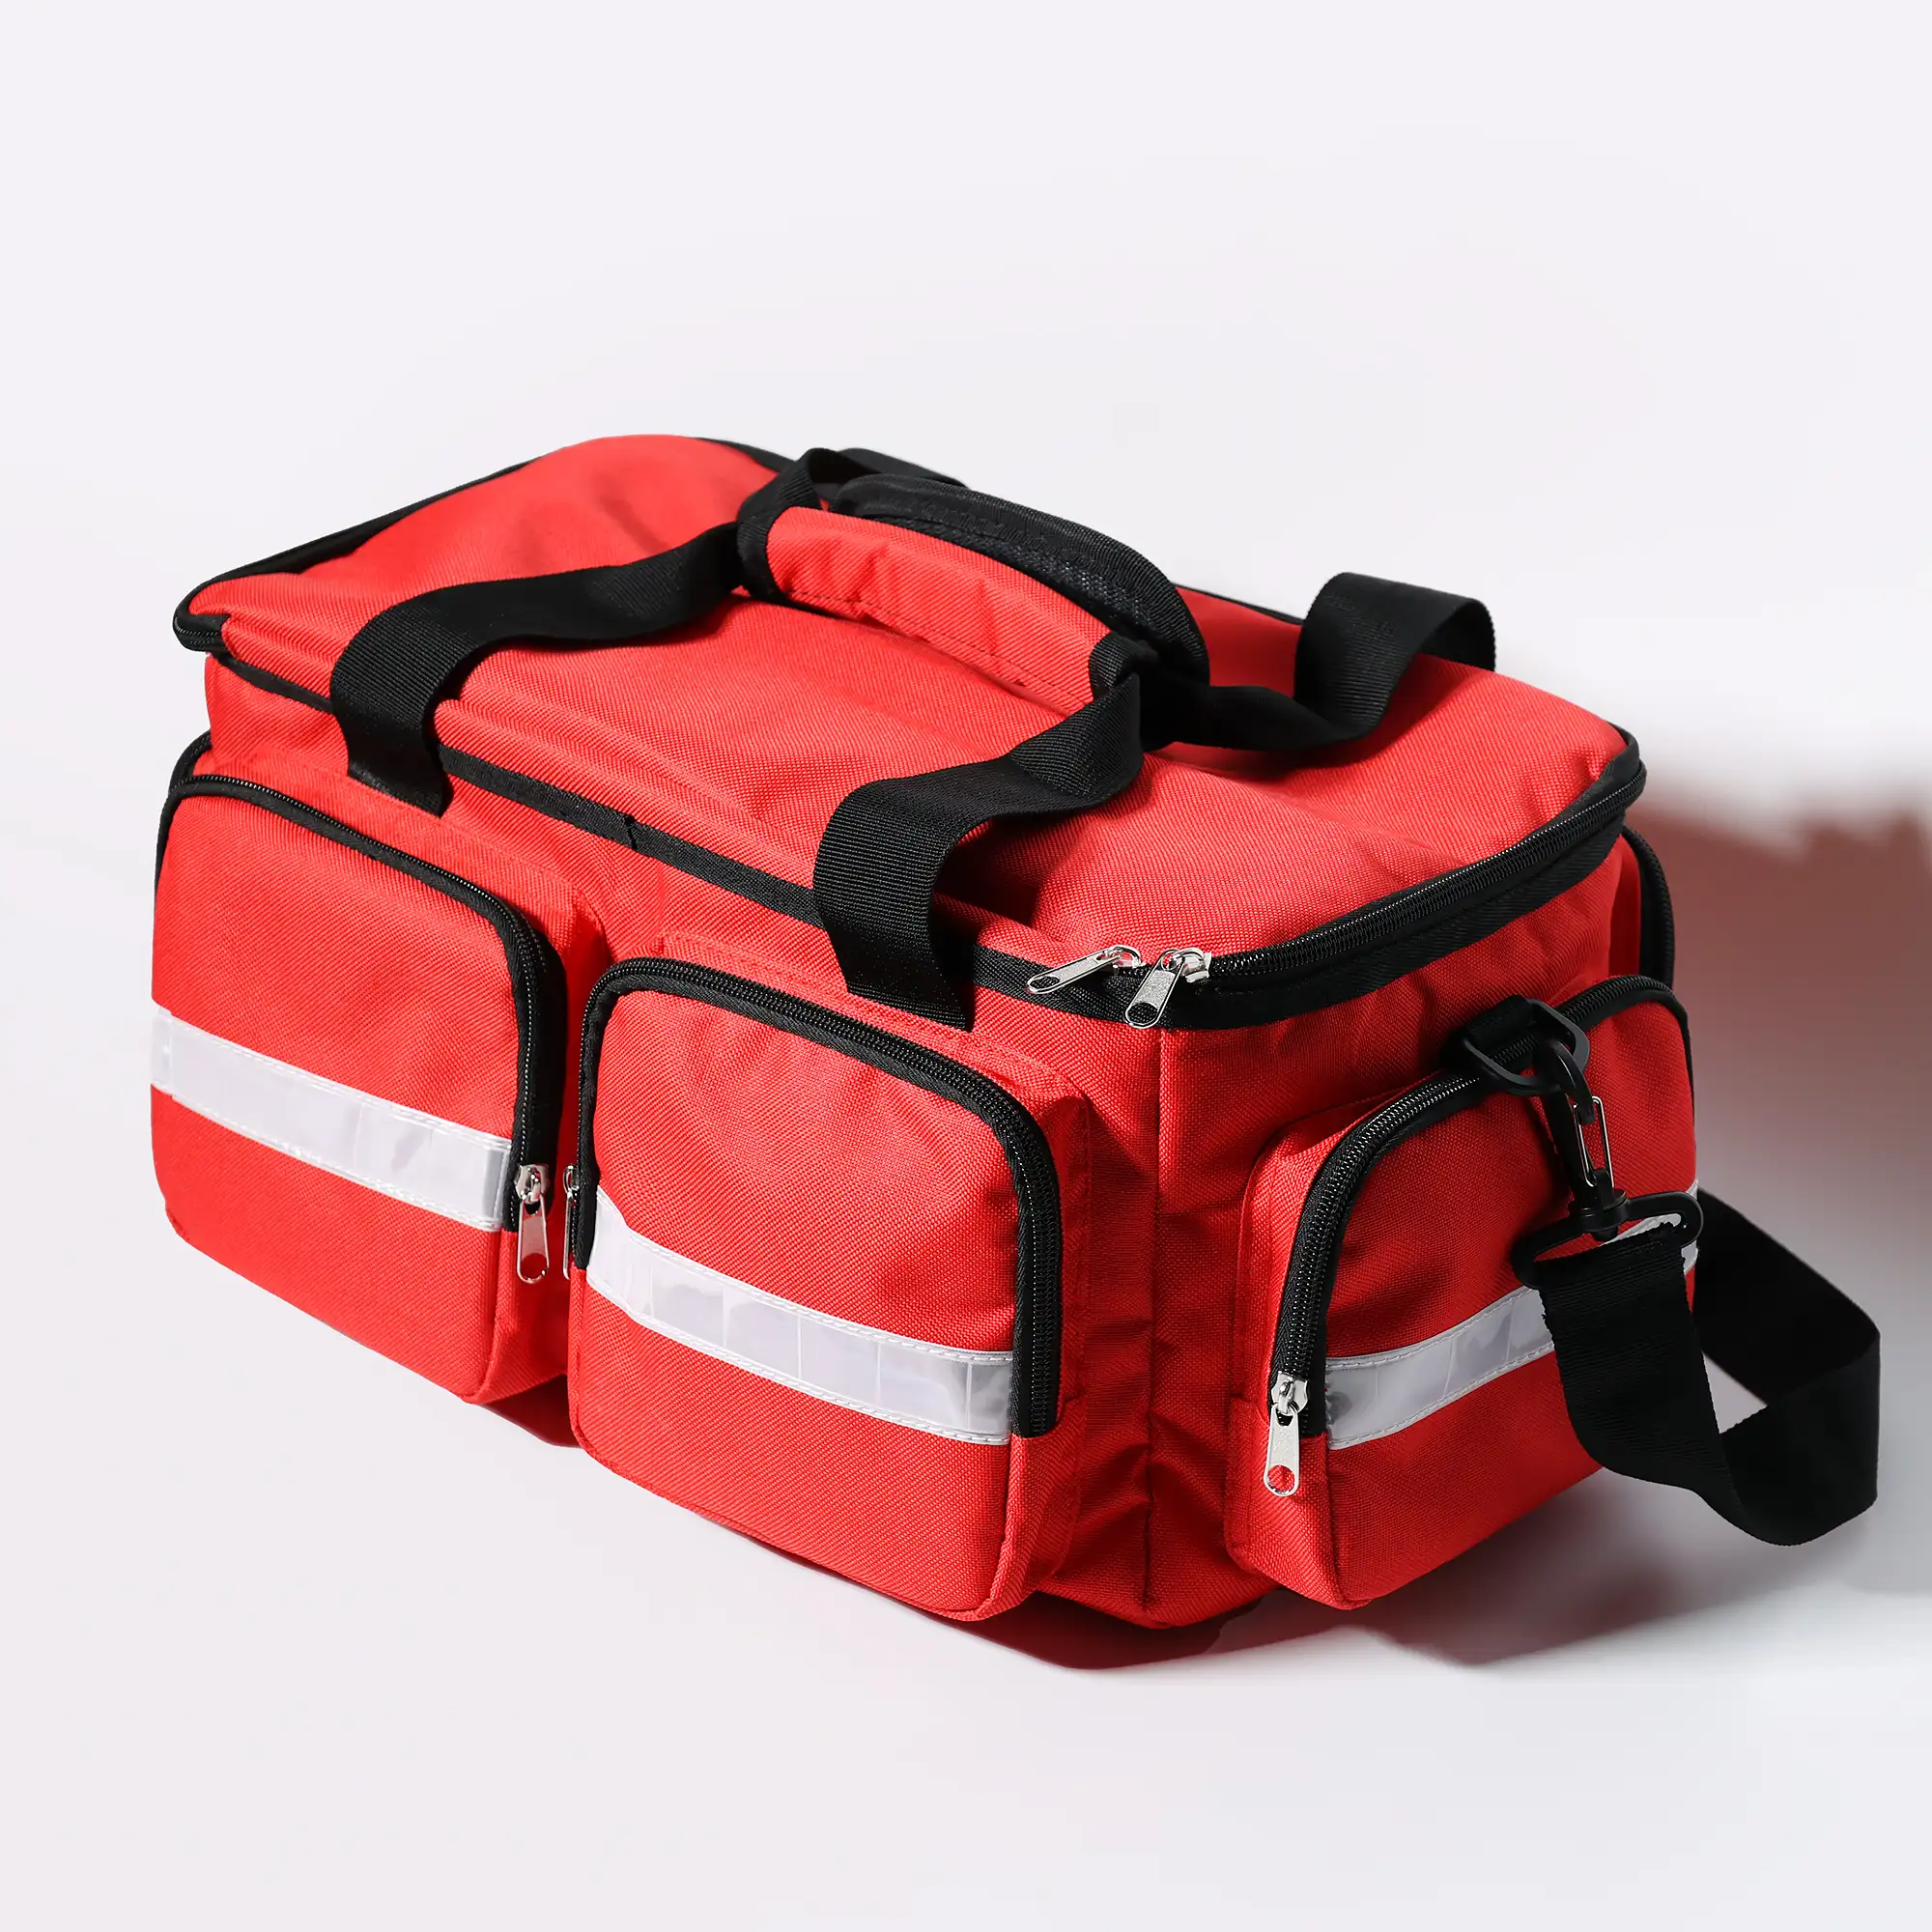 Medical Kits With Equipment Baby First Aid Kit Traveling Travel First-Aid Bags